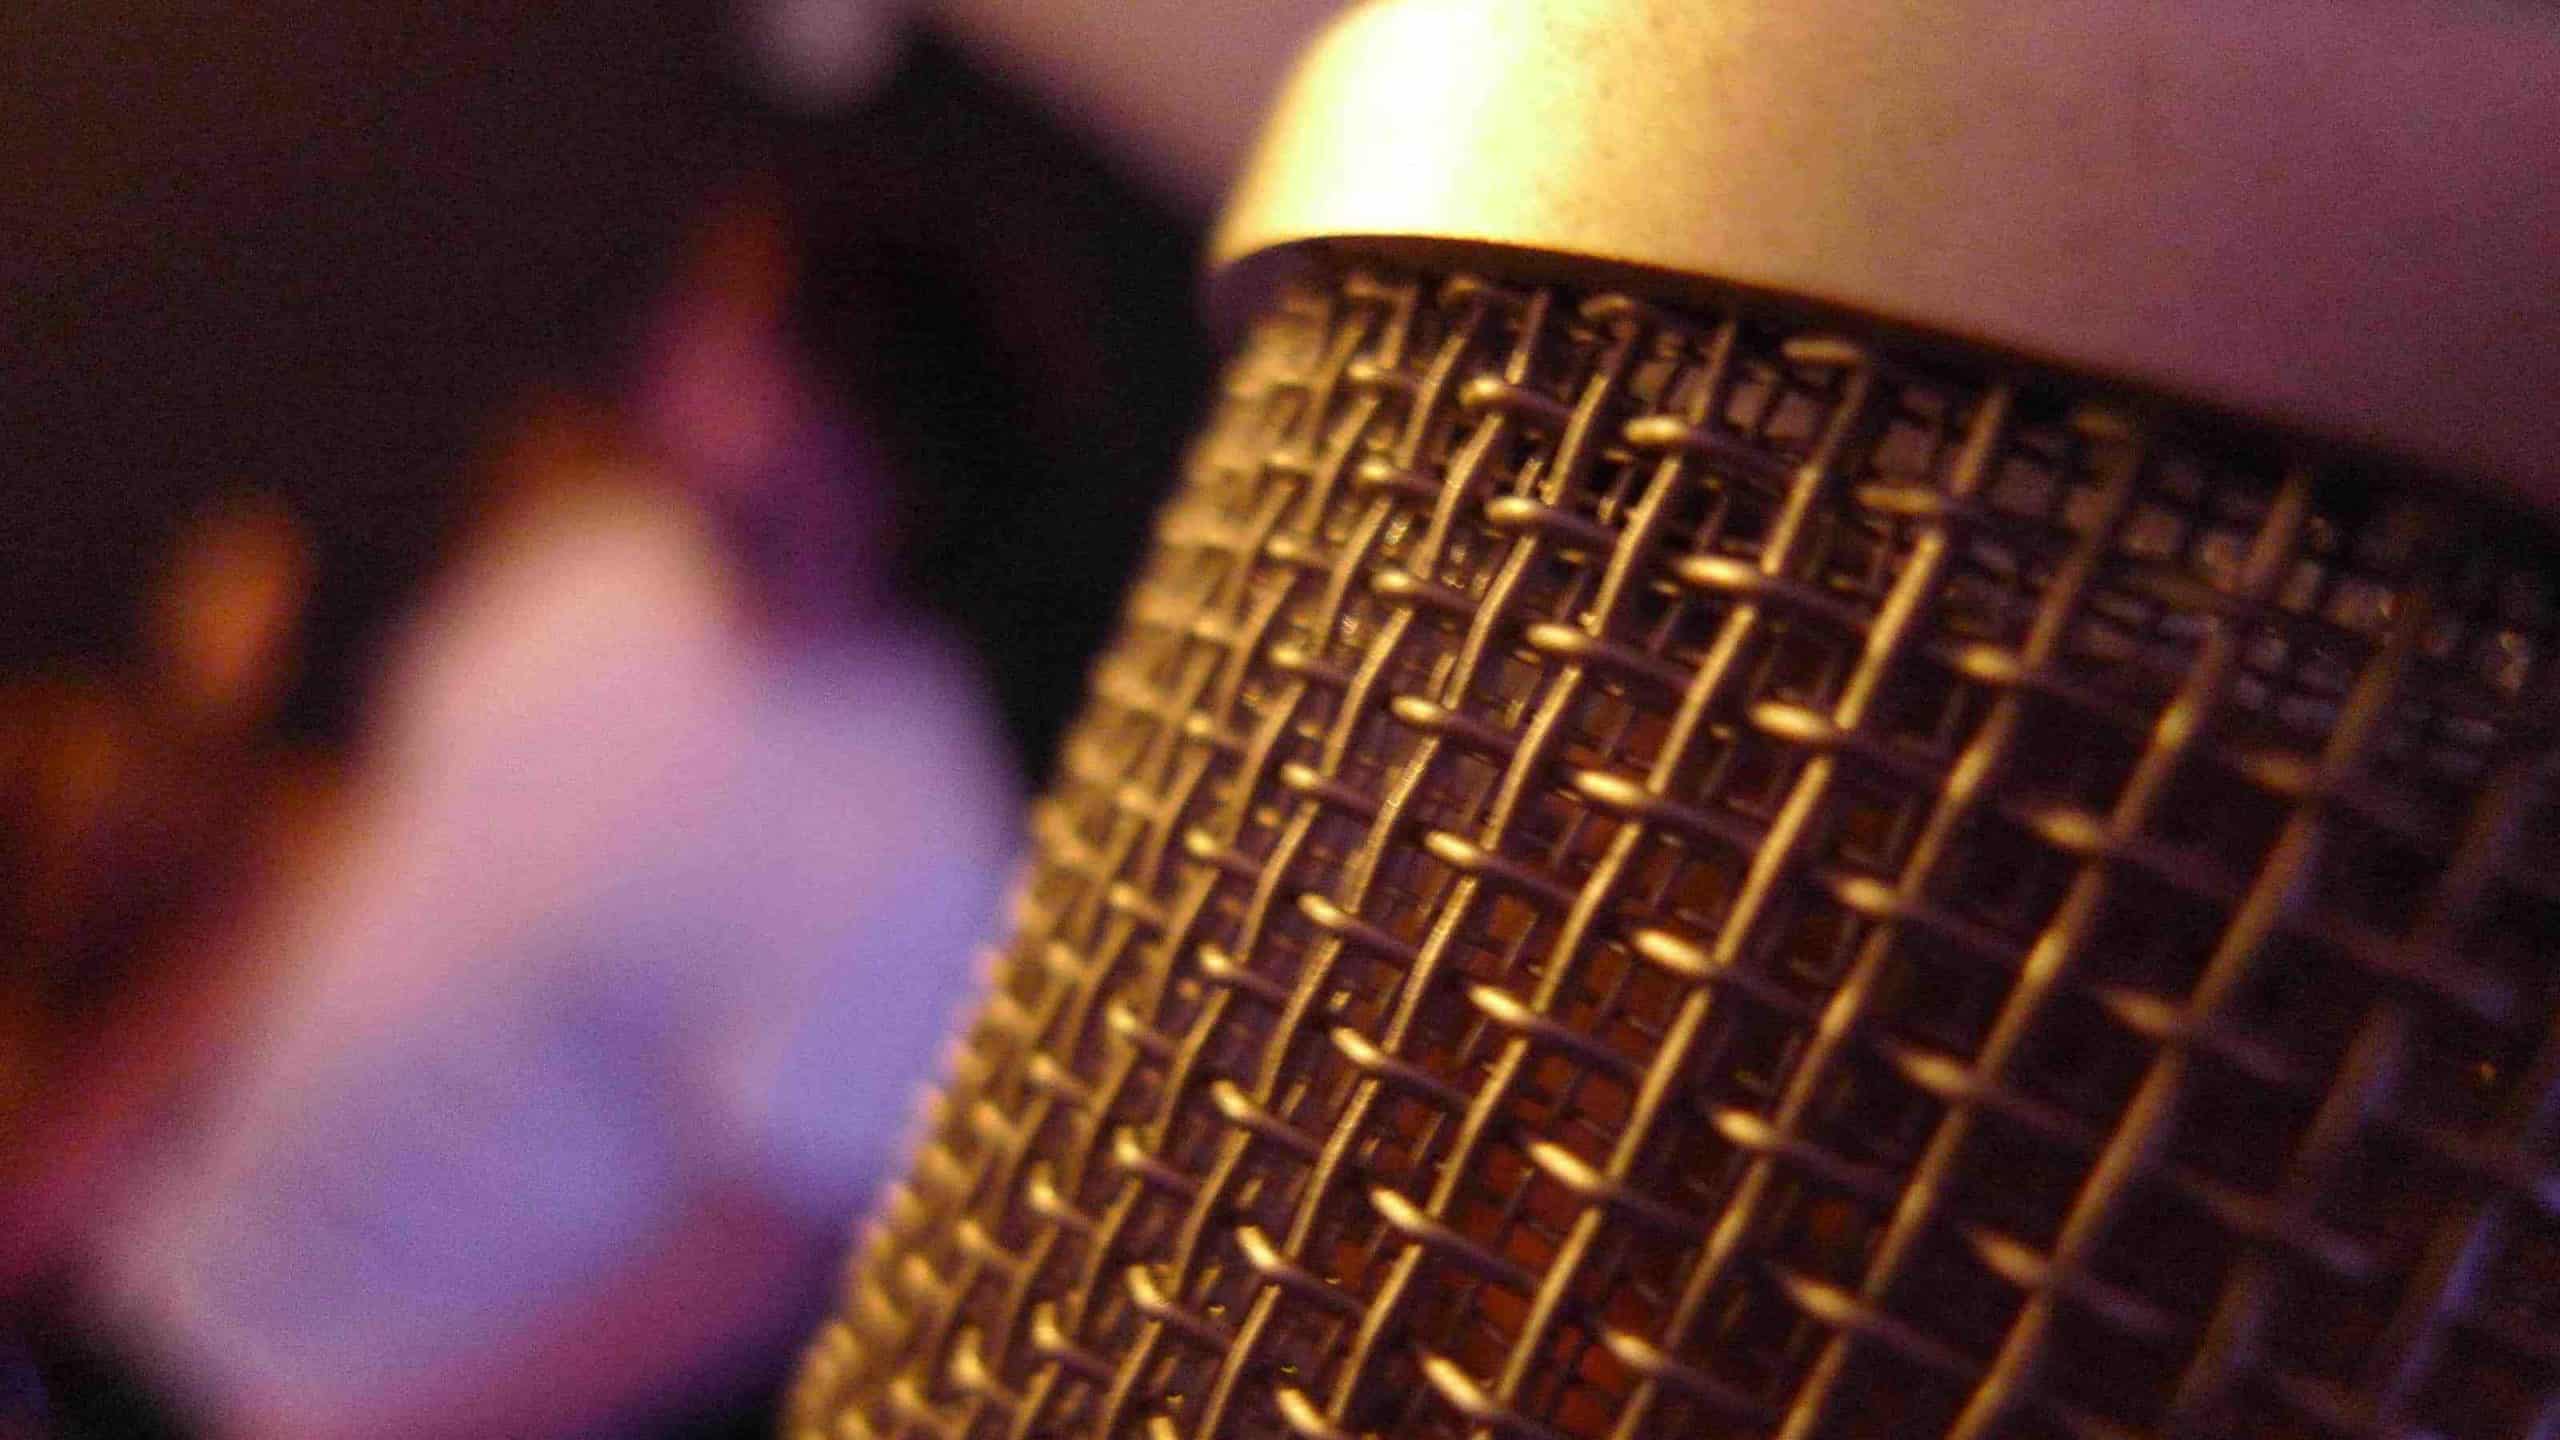 A microphone shimmers close-up in purple and gold lighting. Creative Commons courtesy photo.